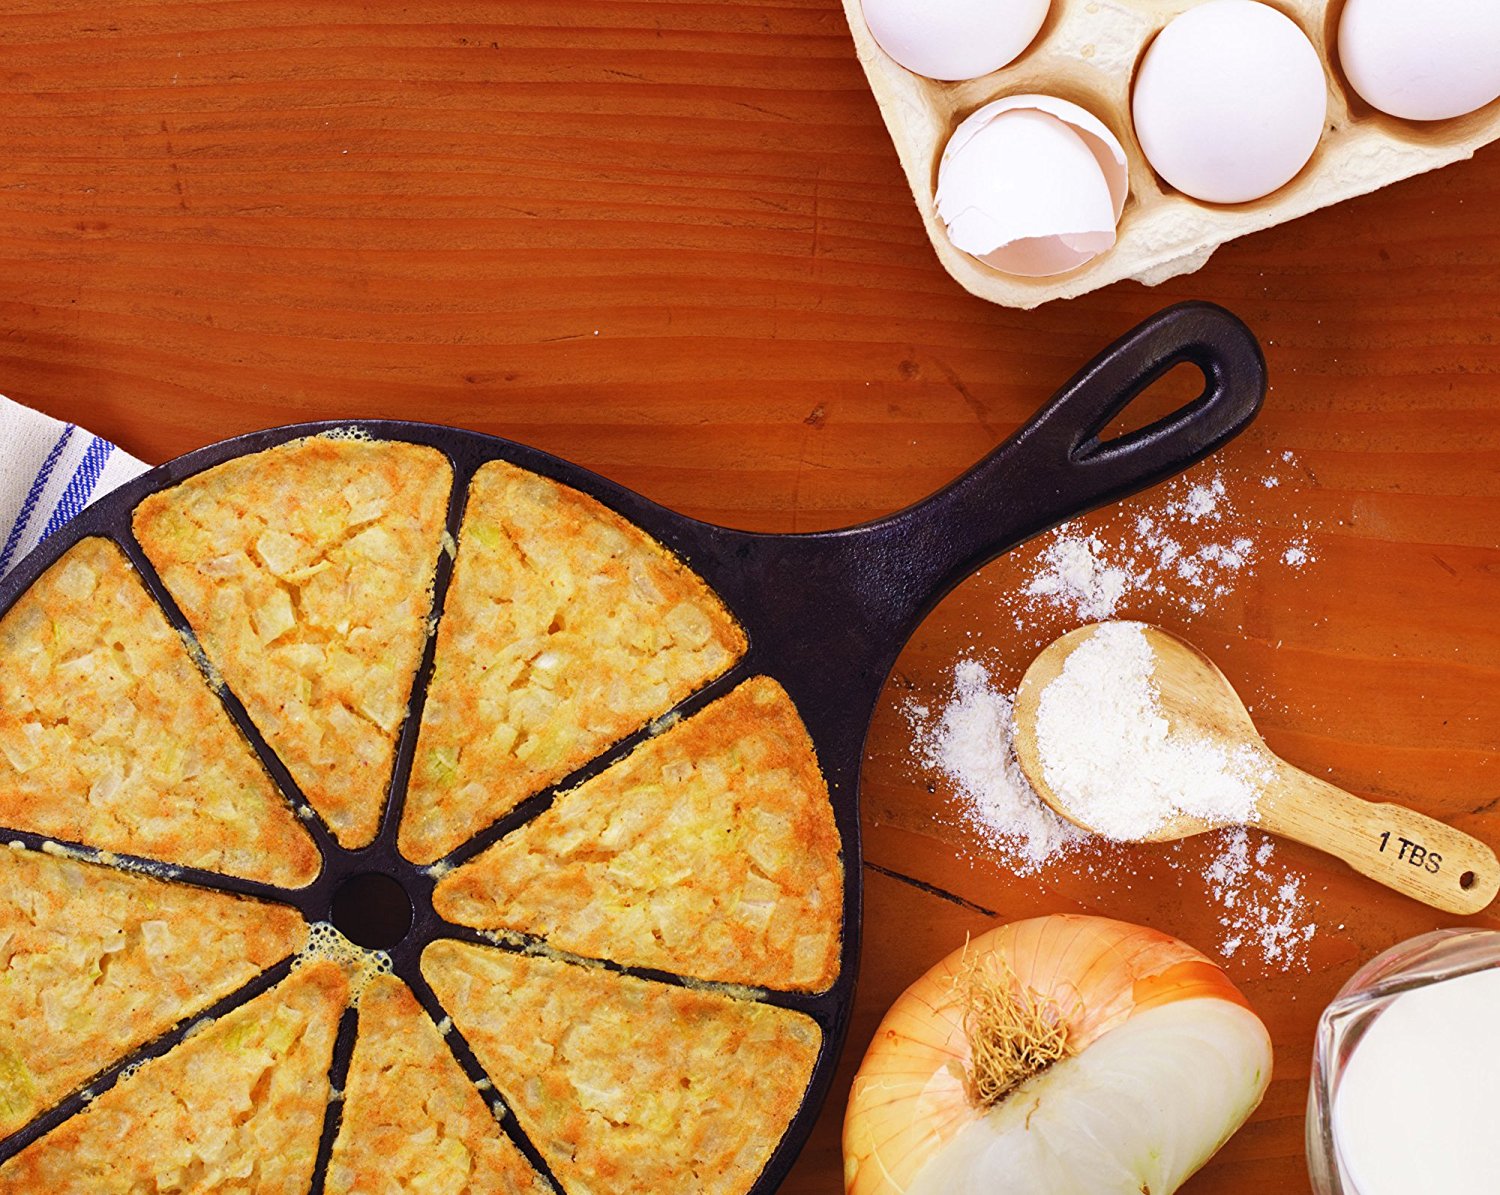 10 Cast Iron Cookware Items You Never Knew You Needed